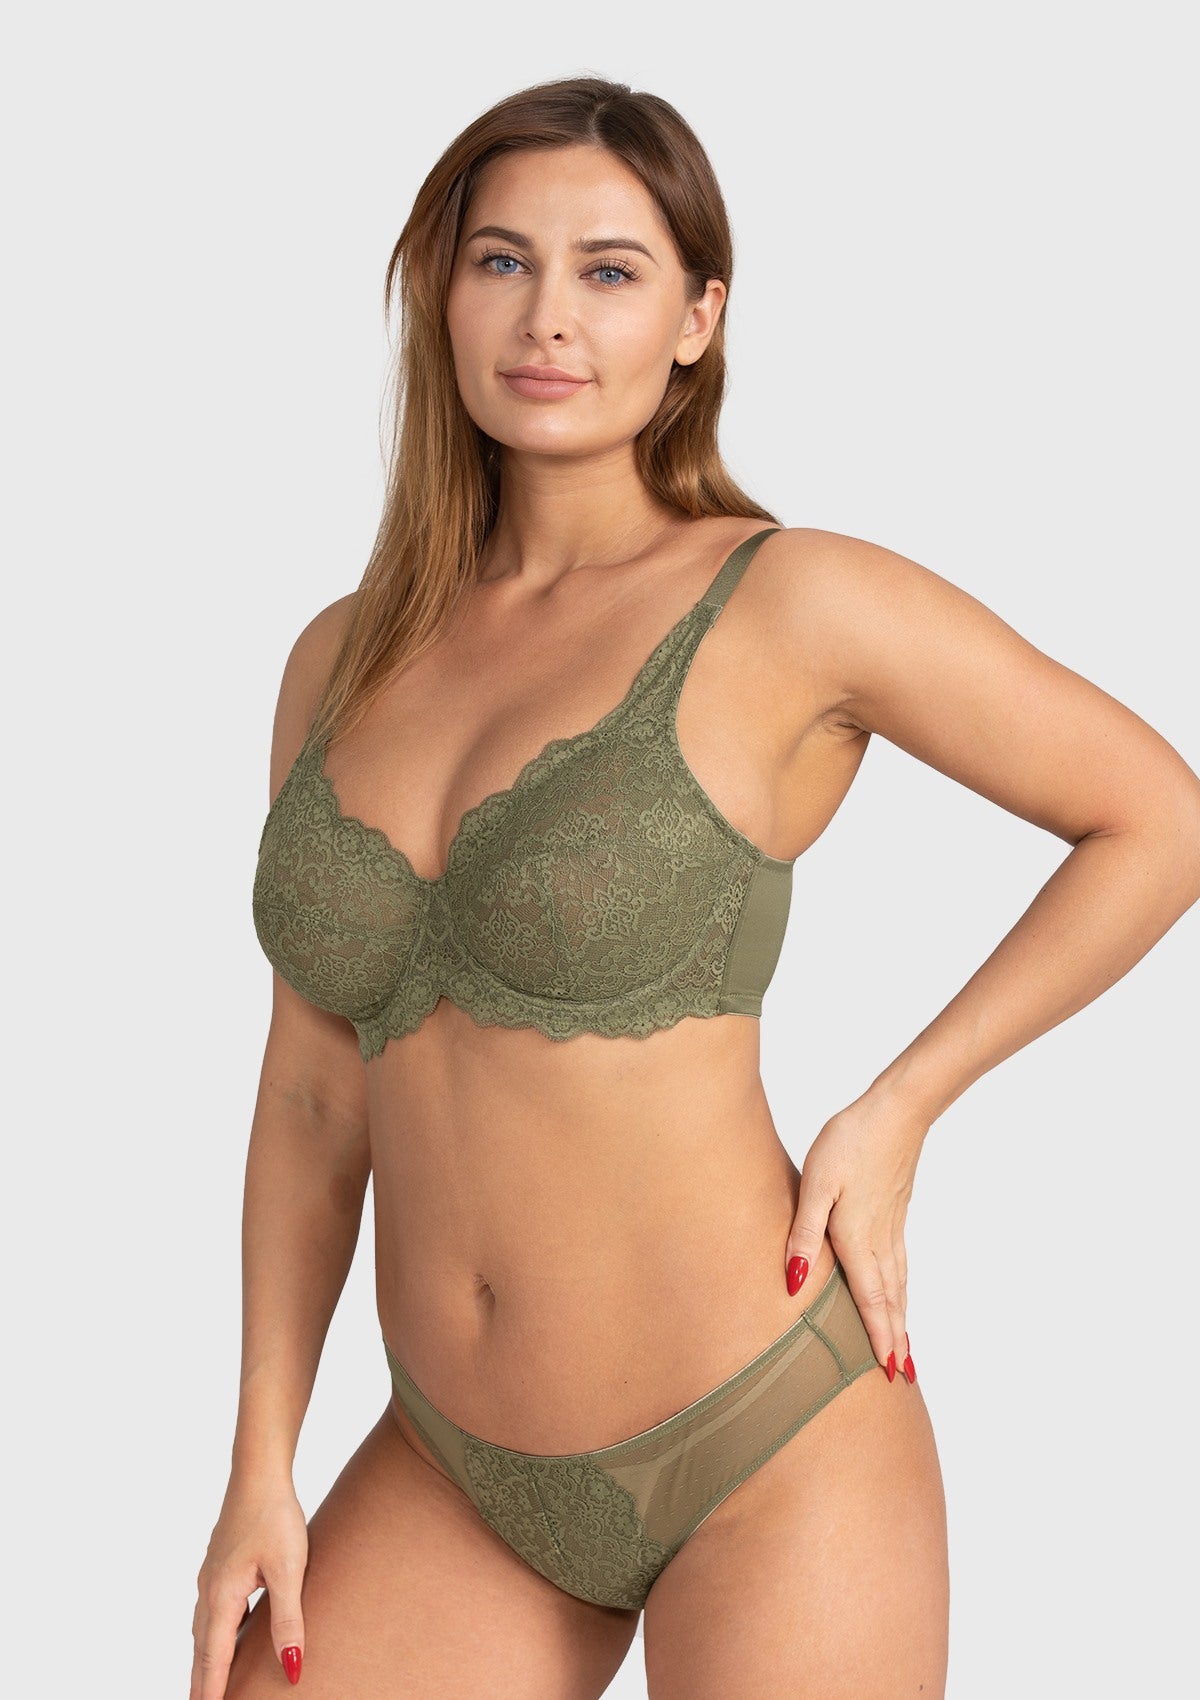 HSIA All-Over Floral Lace Unlined Bra: Minimizer Bra For Heavy Breasts - Dark Green / 38 / D